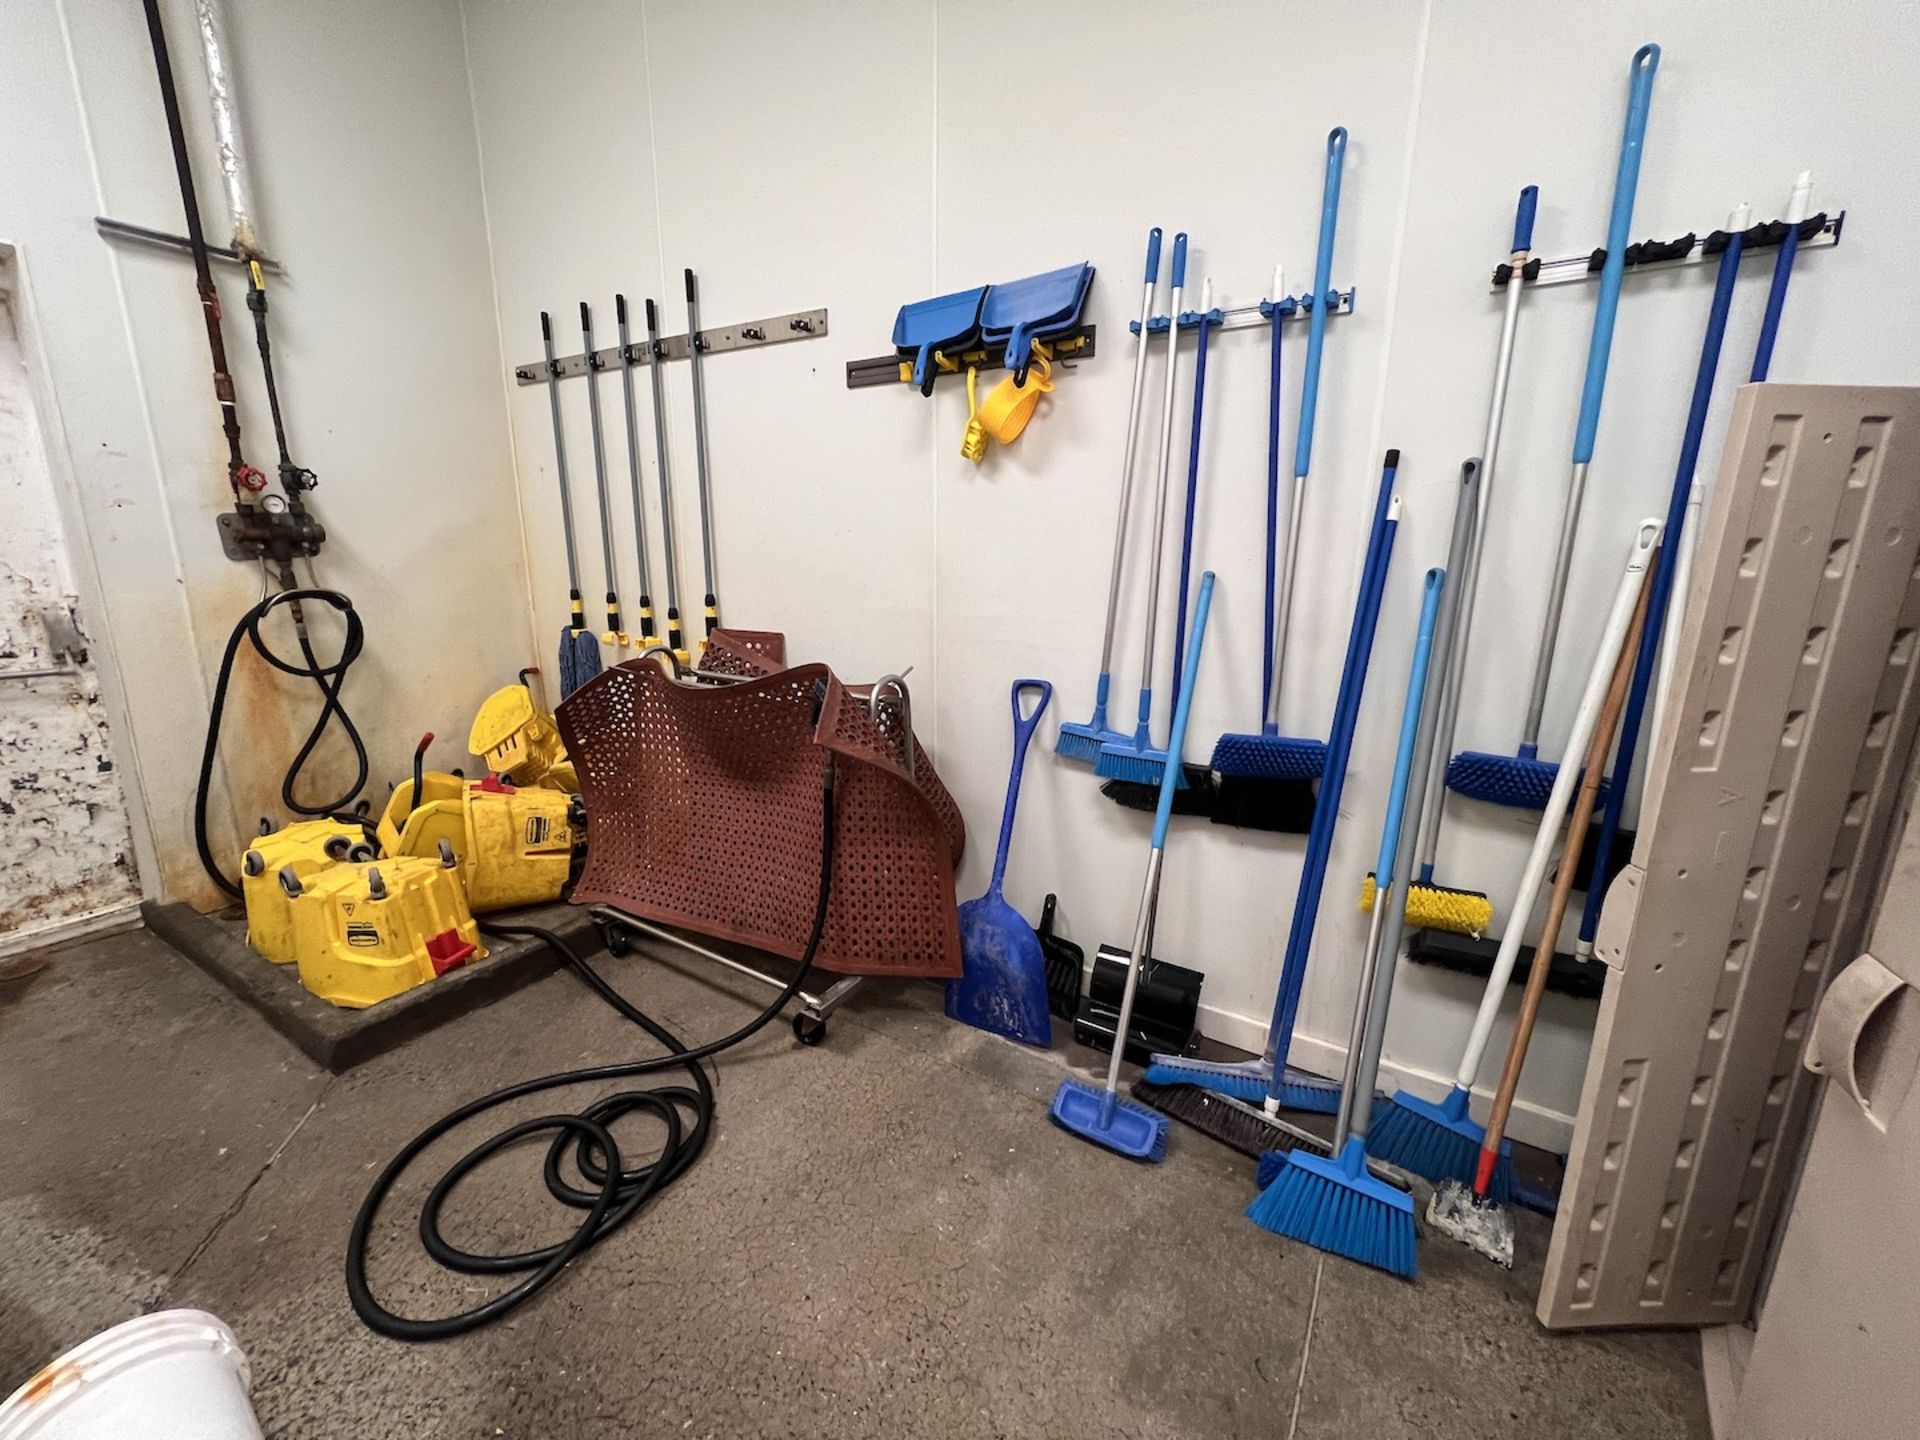 JANITORIAL SUPPLY ROOM, INCLUDES ROOM CONTENTS